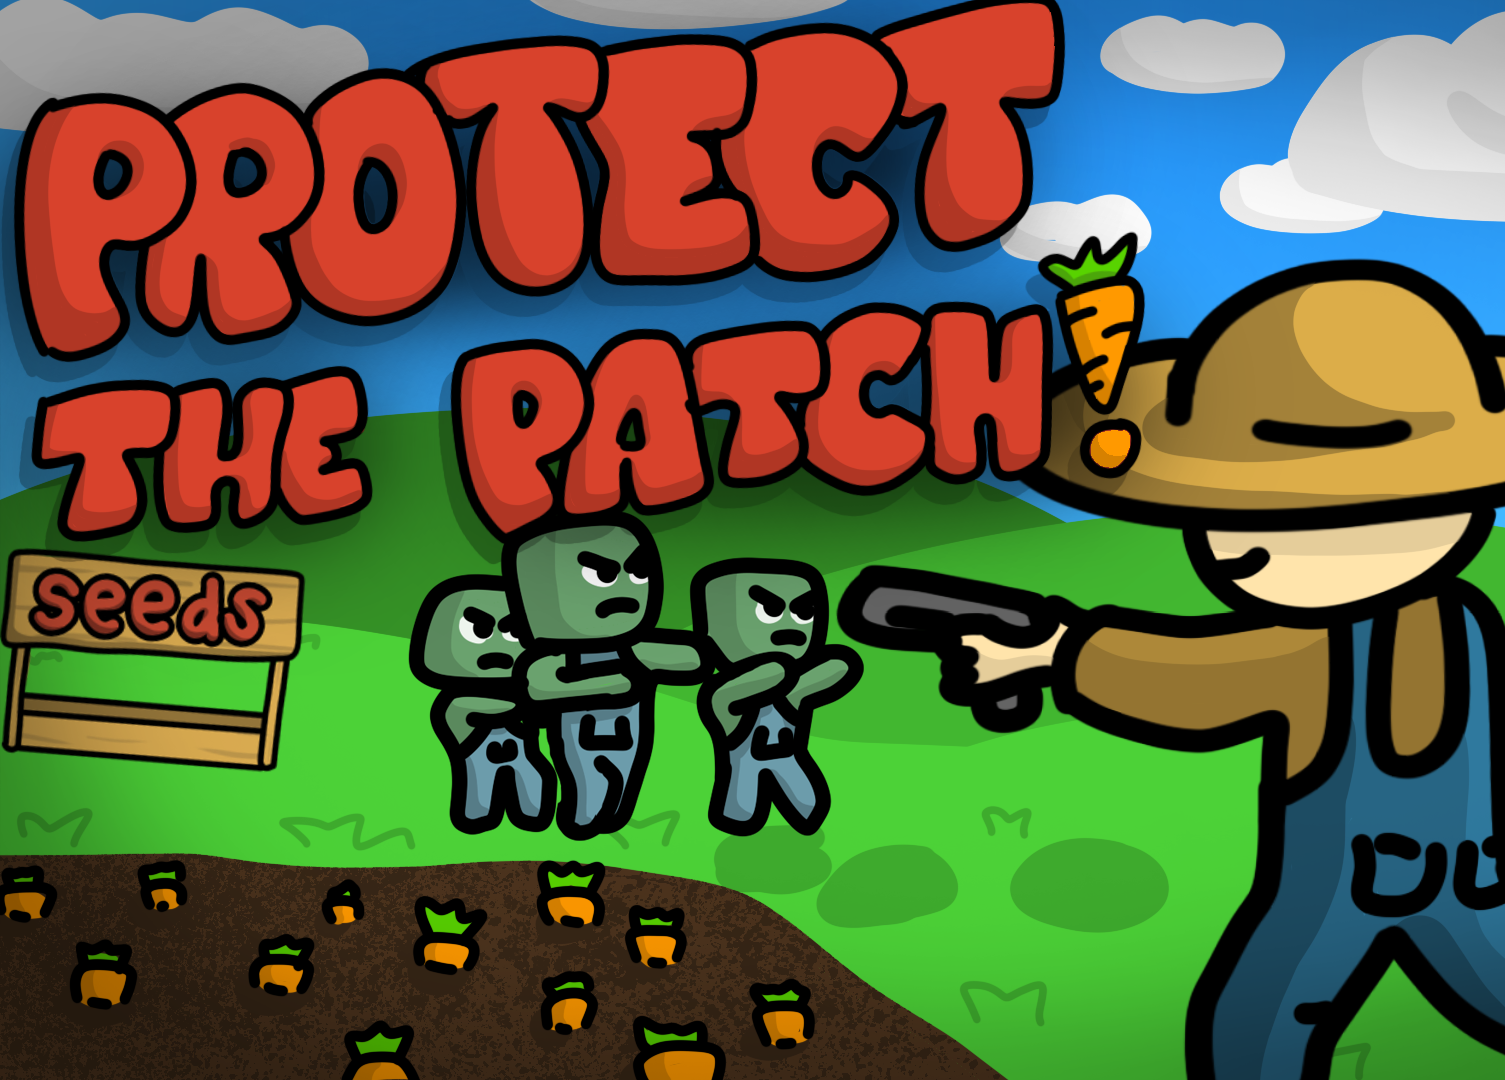 Protect The Patch!